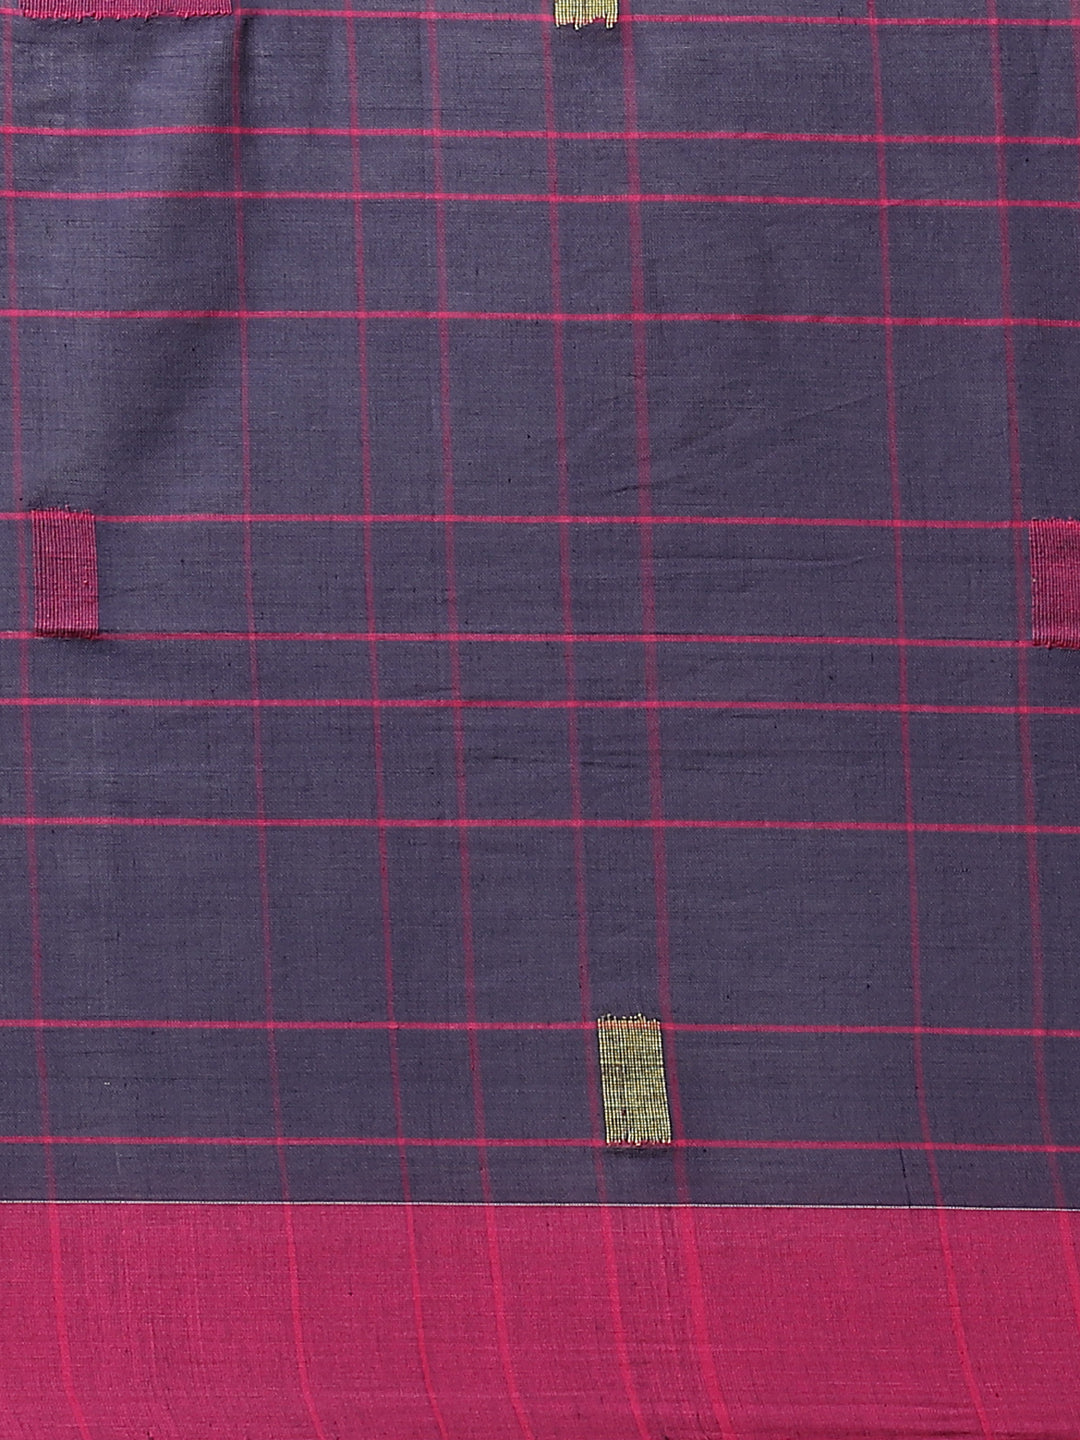 Purple and Blue, Kalakari India Cotton Purple Hand crafted saree with blouse SHBESA0020-Saree-Kalakari India-SHBESA0020-Bengal, Cotton, Geographical Indication, Hand Crafted, Heritage Prints, Ikkat, Natural Dyes, Red, Sarees, Sustainable Fabrics, Woven, Yellow-[Linen,Ethnic,wear,Fashionista,Handloom,Handicraft,Indigo,blockprint,block,print,Cotton,Chanderi,Blue, latest,classy,party,bollywood,trendy,summer,style,traditional,formal,elegant,unique,style,hand,block,print, dabu,booti,gift,present,glam